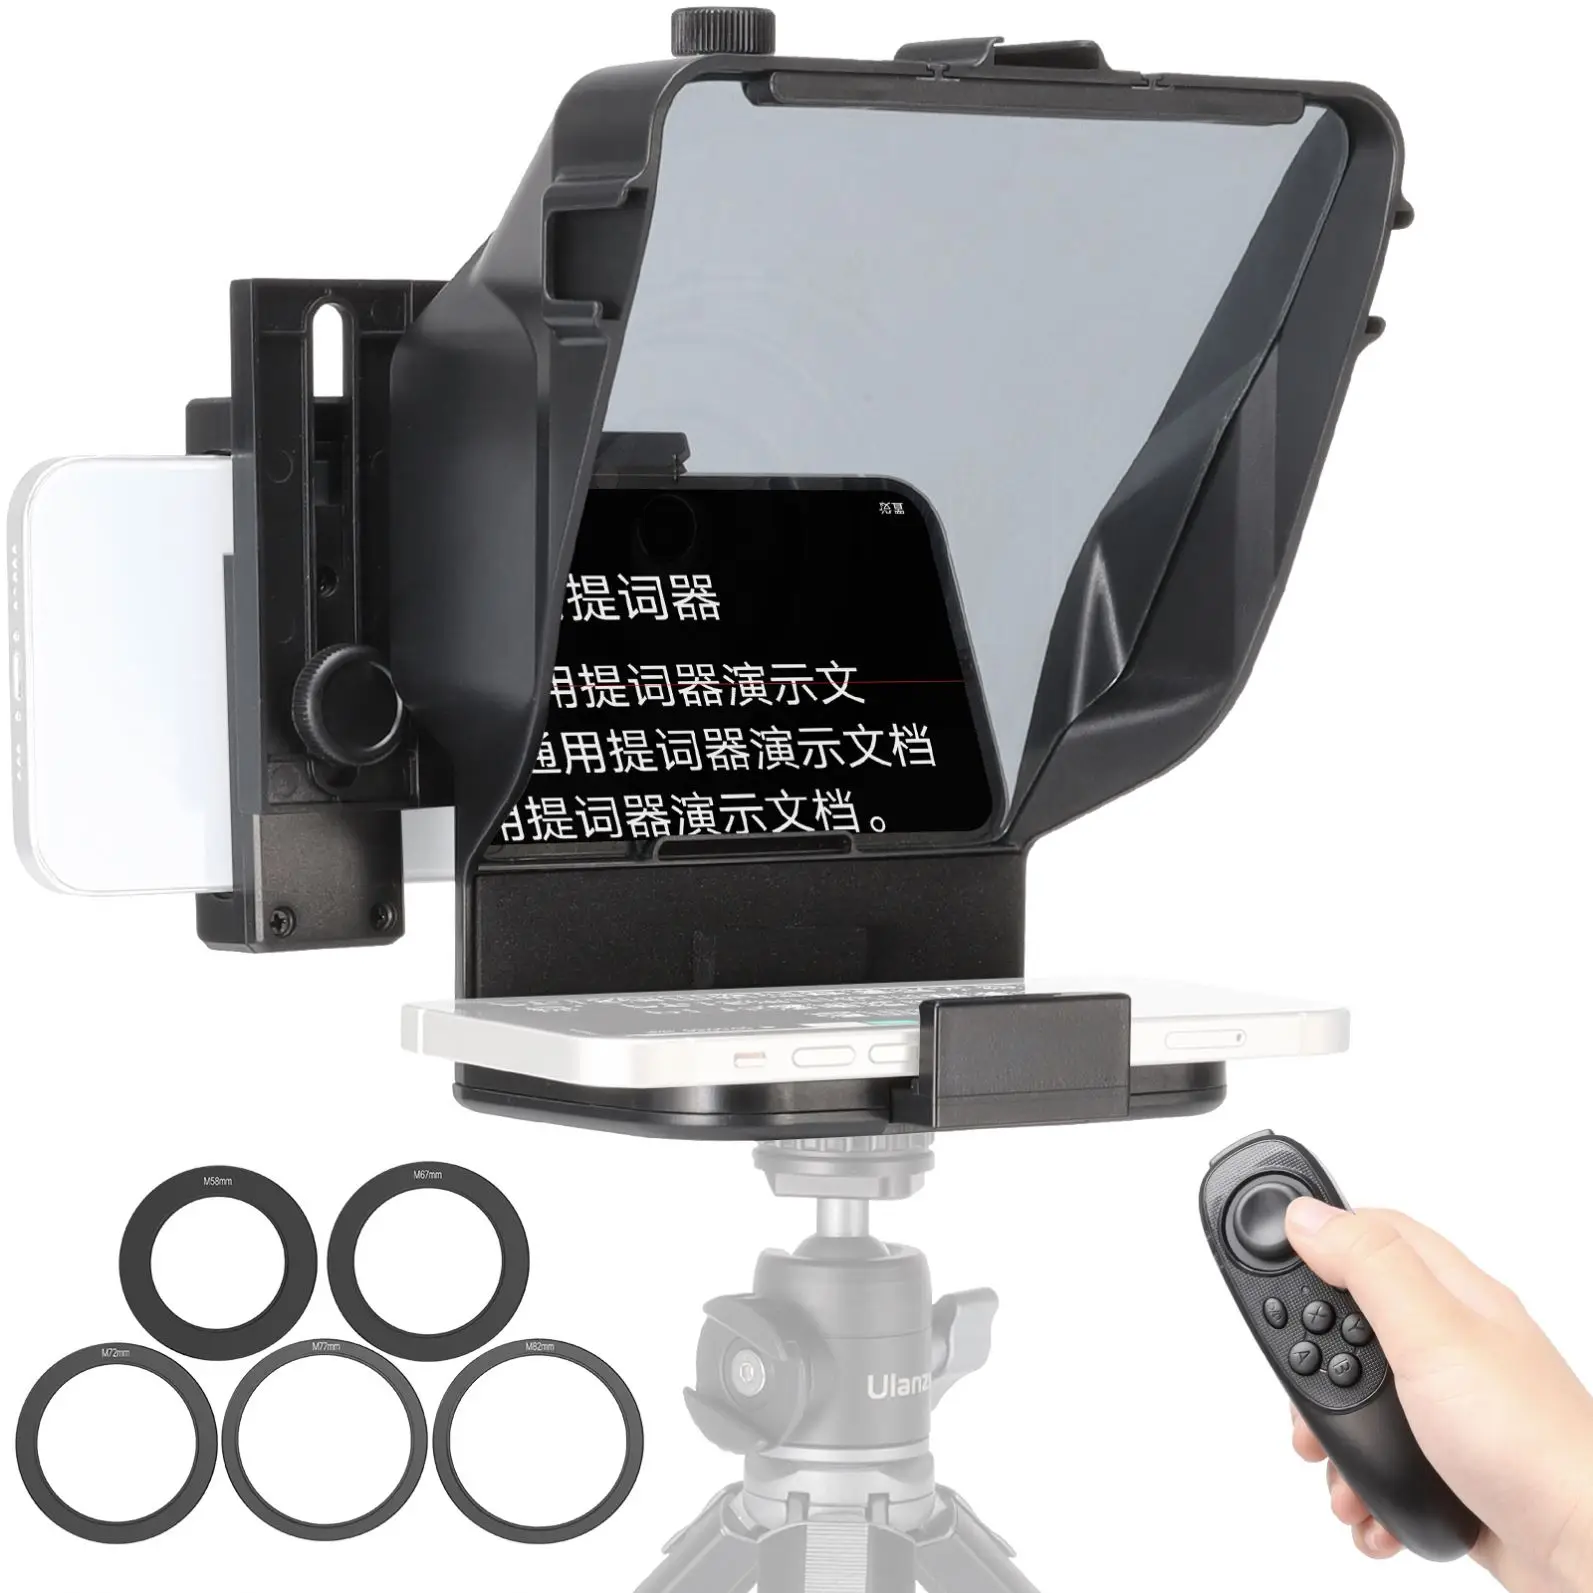 

Ulanzi PT-15 Teleprompter for Mobile phones Camera live broadcast video recording